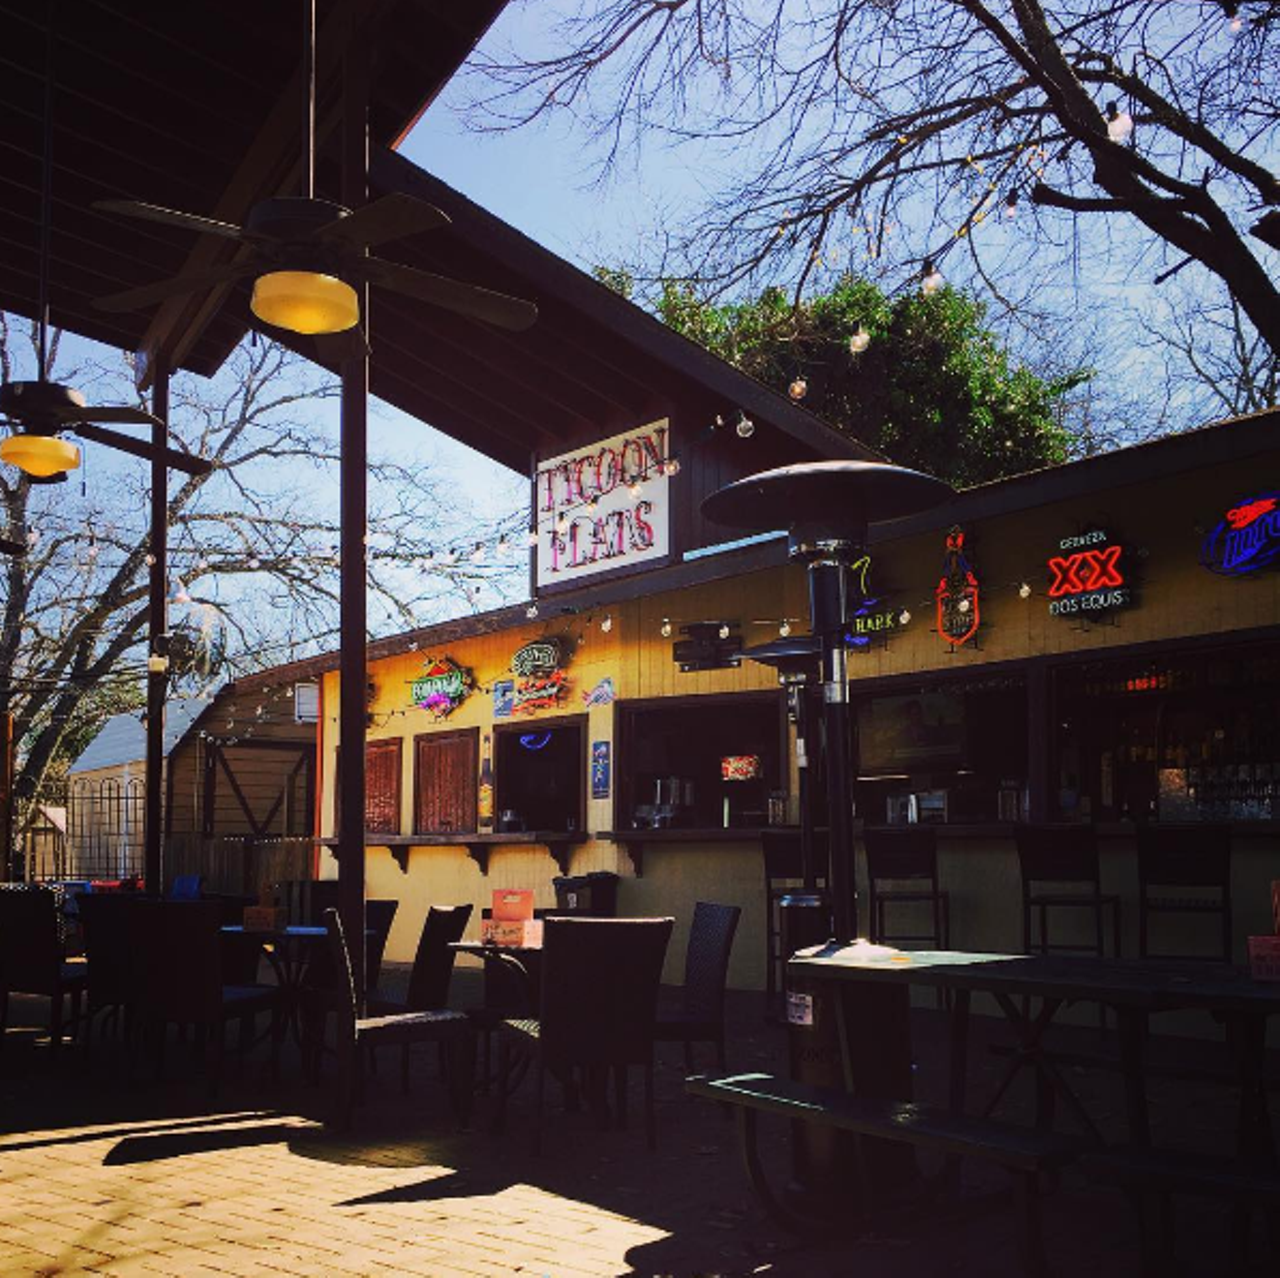  Tycoon Flats
2926 N. St Mary's, (210) 320-0819
The burger joint and beer garden offers drink specials, margaritas, Texas craft and domestic beers, just to name a few options. There's plenty of outdoor seating, with a play area for kids. 
Photo via Instagram/dann_el_